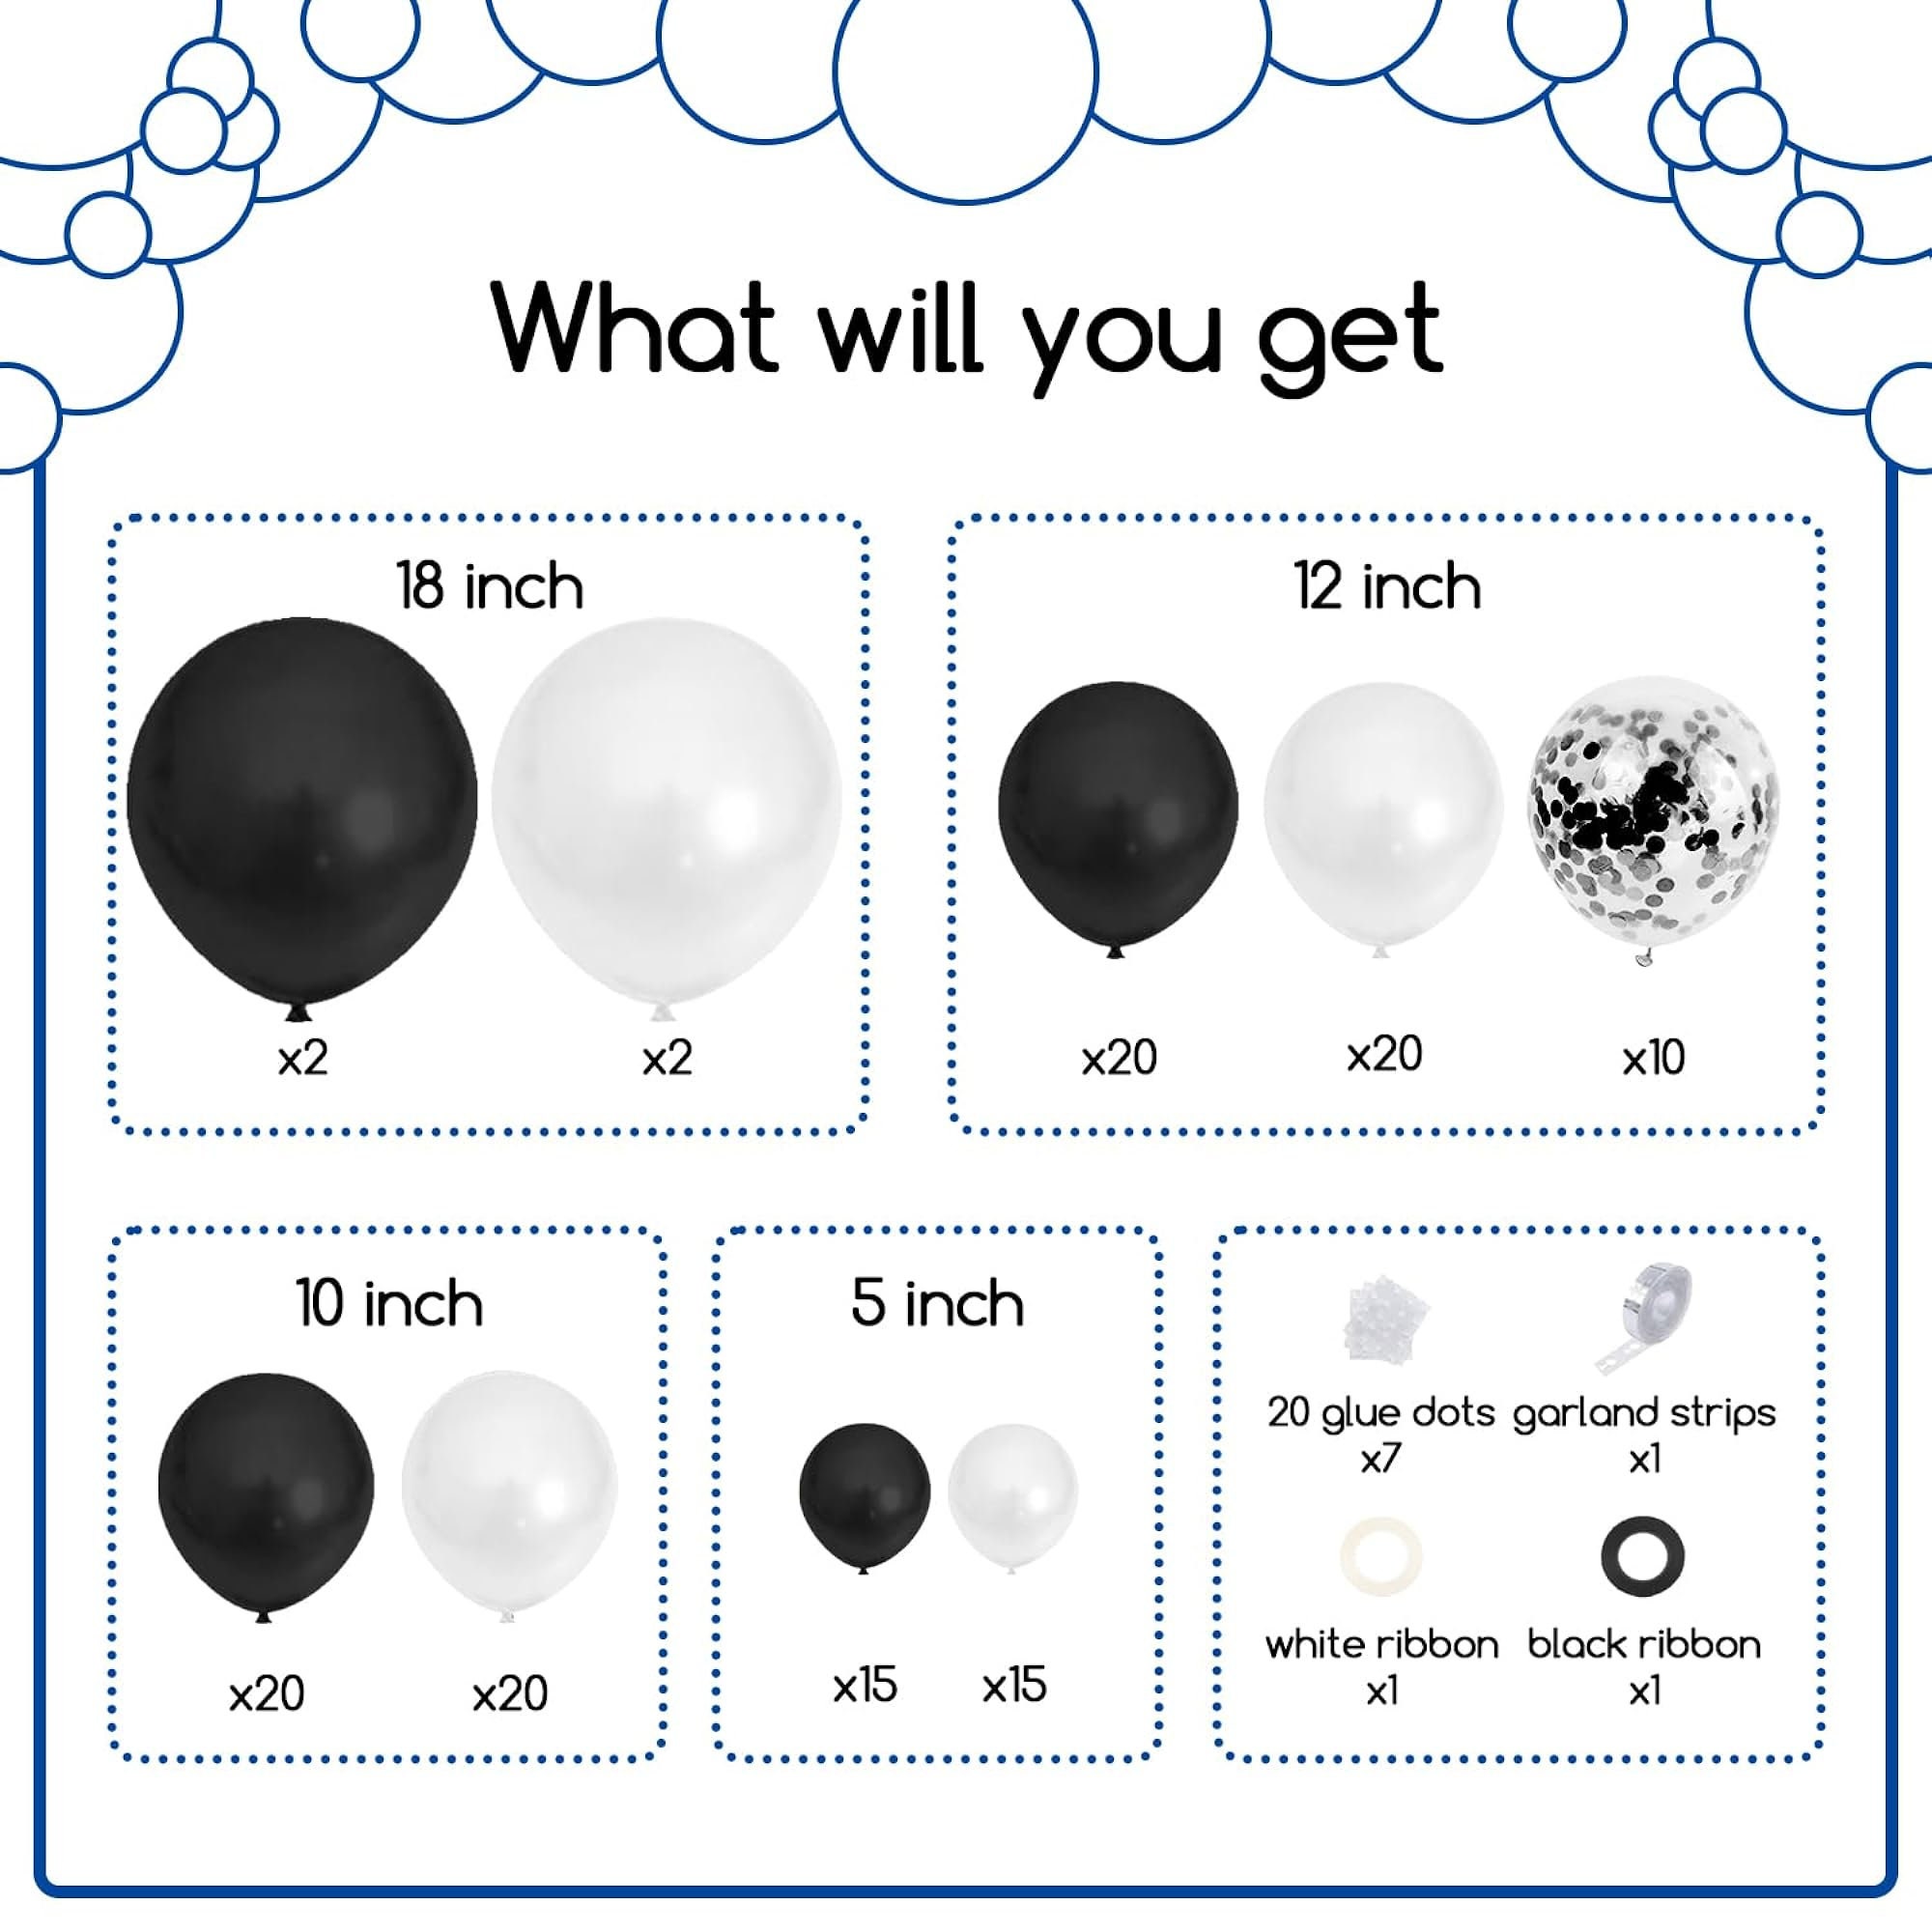  Black and White Balloon Garland Kit, 124Pcs Arch Kit with  Confetti White and Black Balloons, Bright Durable Latex Balloons for  Birthday, Anniversary, Wedding, Engagement, Graduation, Party Decorations :  Home & Kitchen